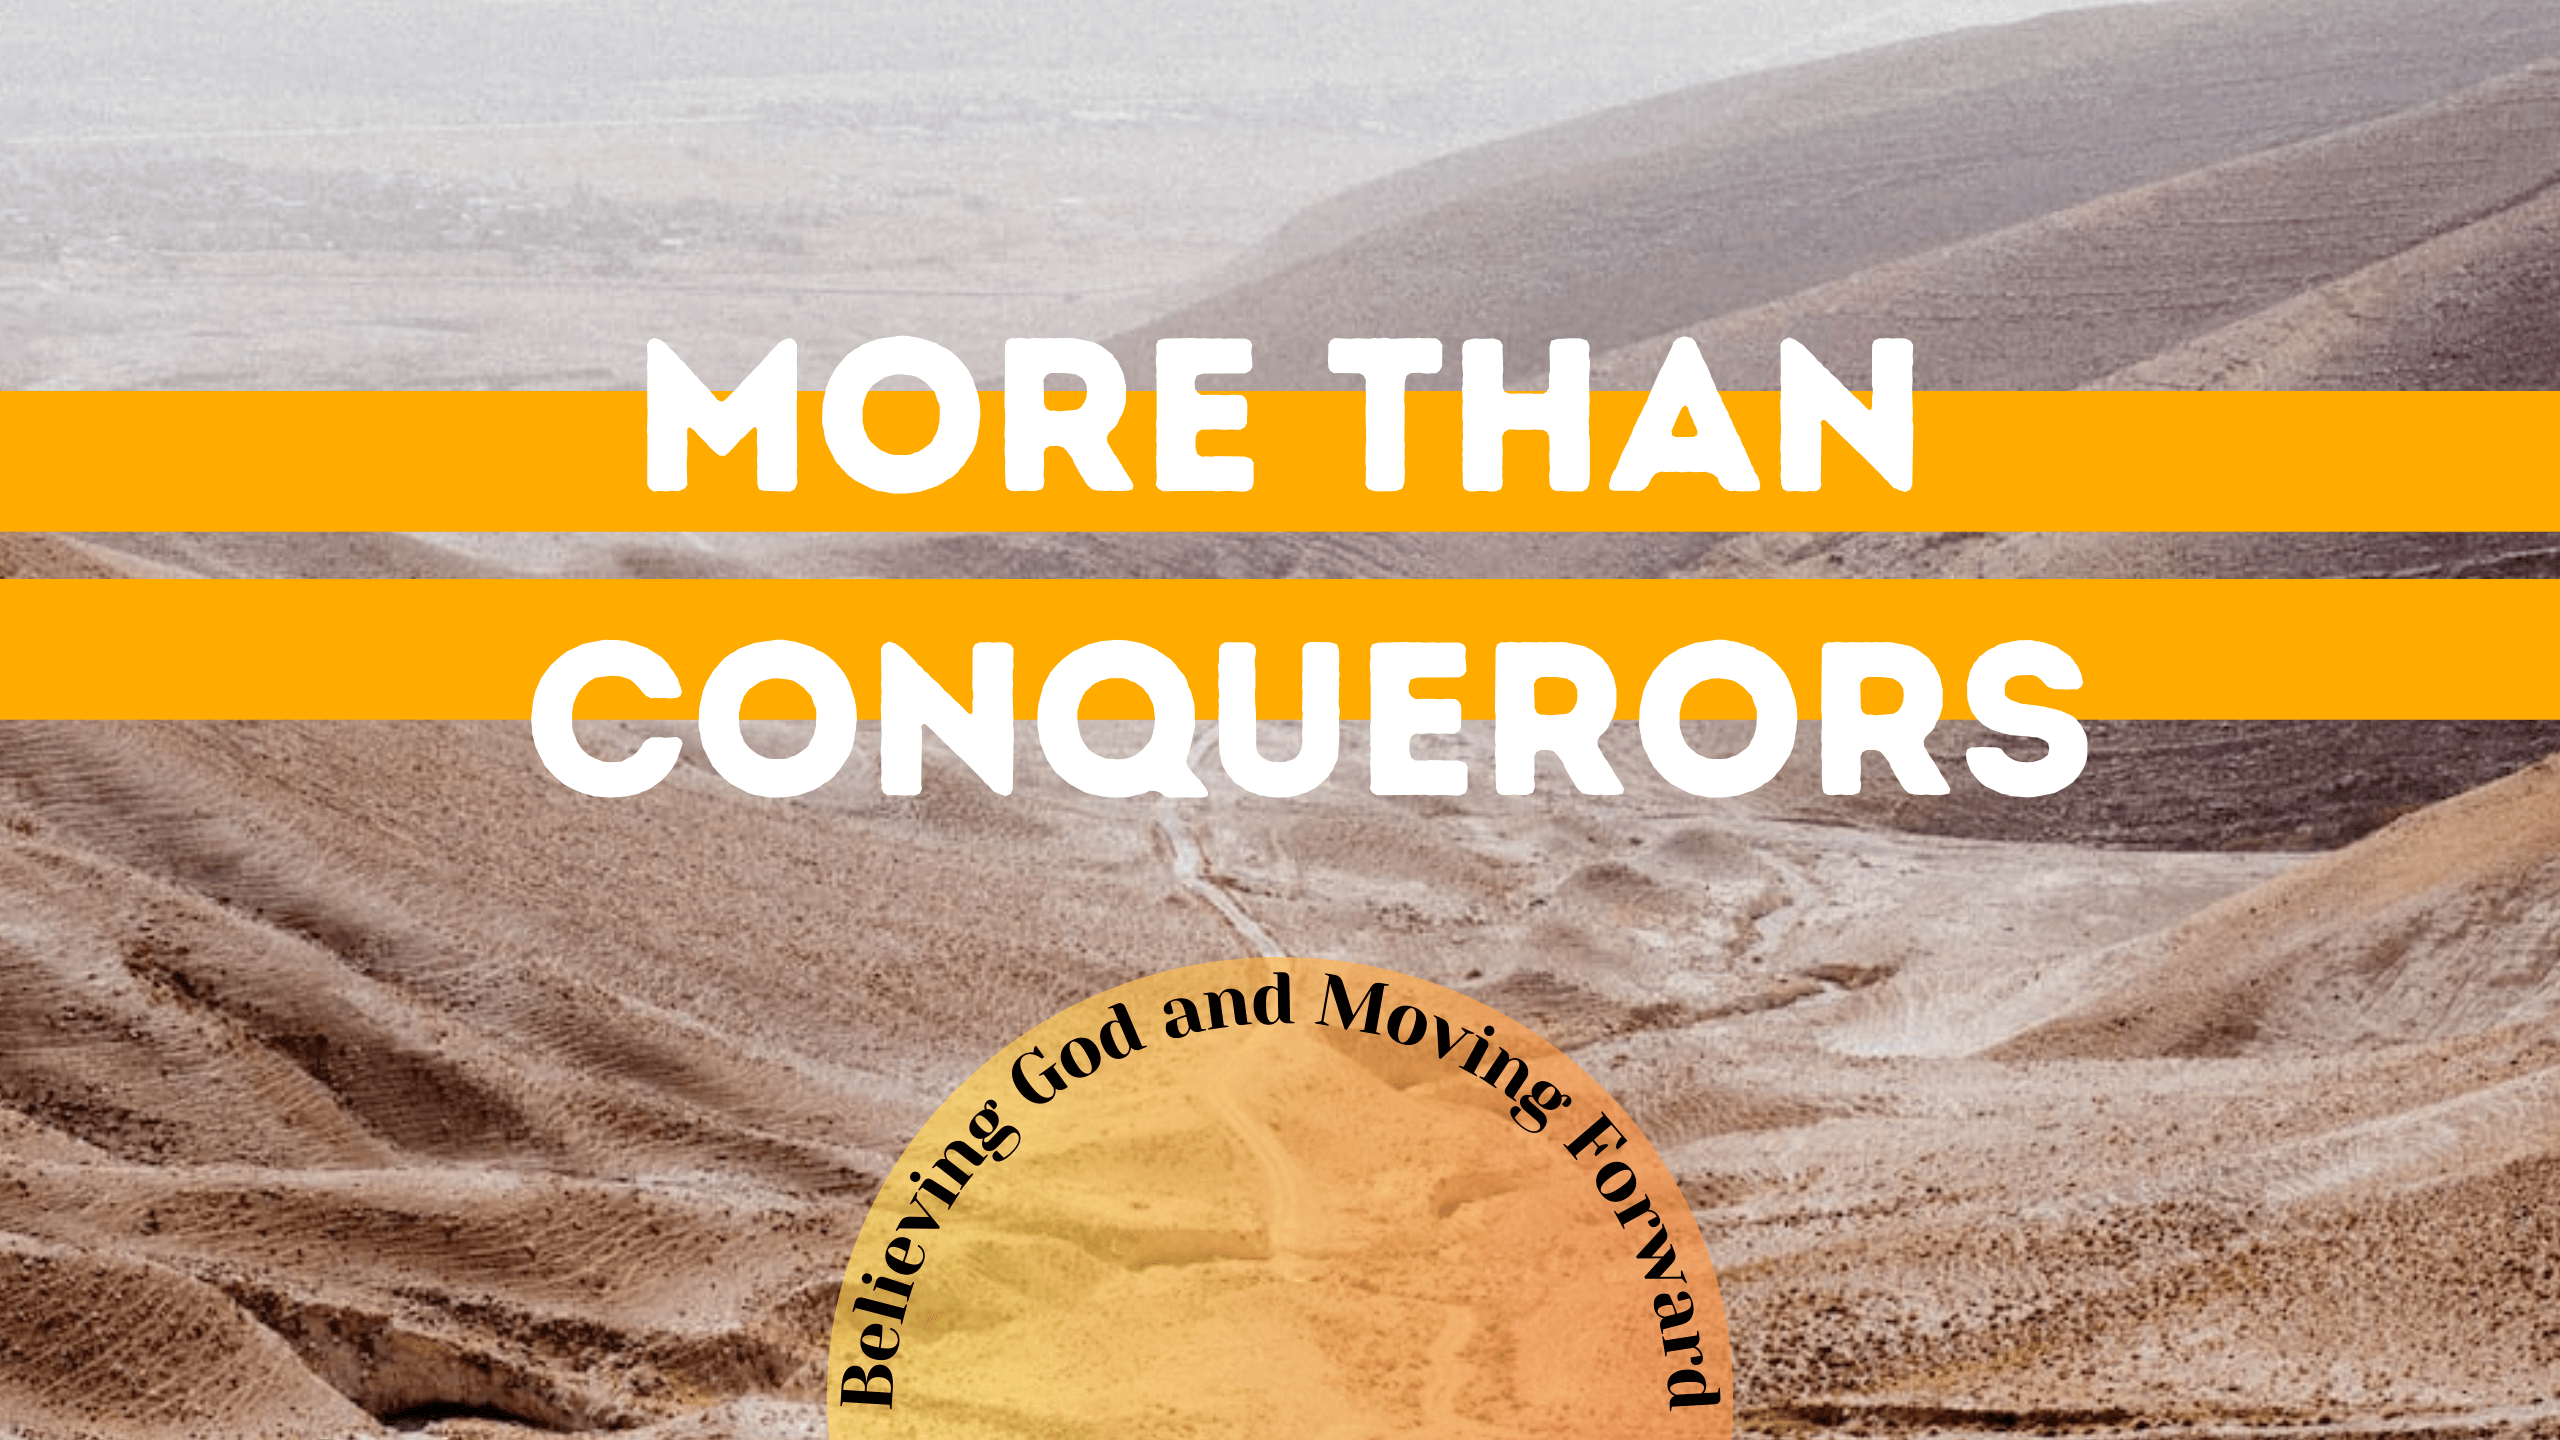 More Than Conquerors: Believing God and Moving Forward